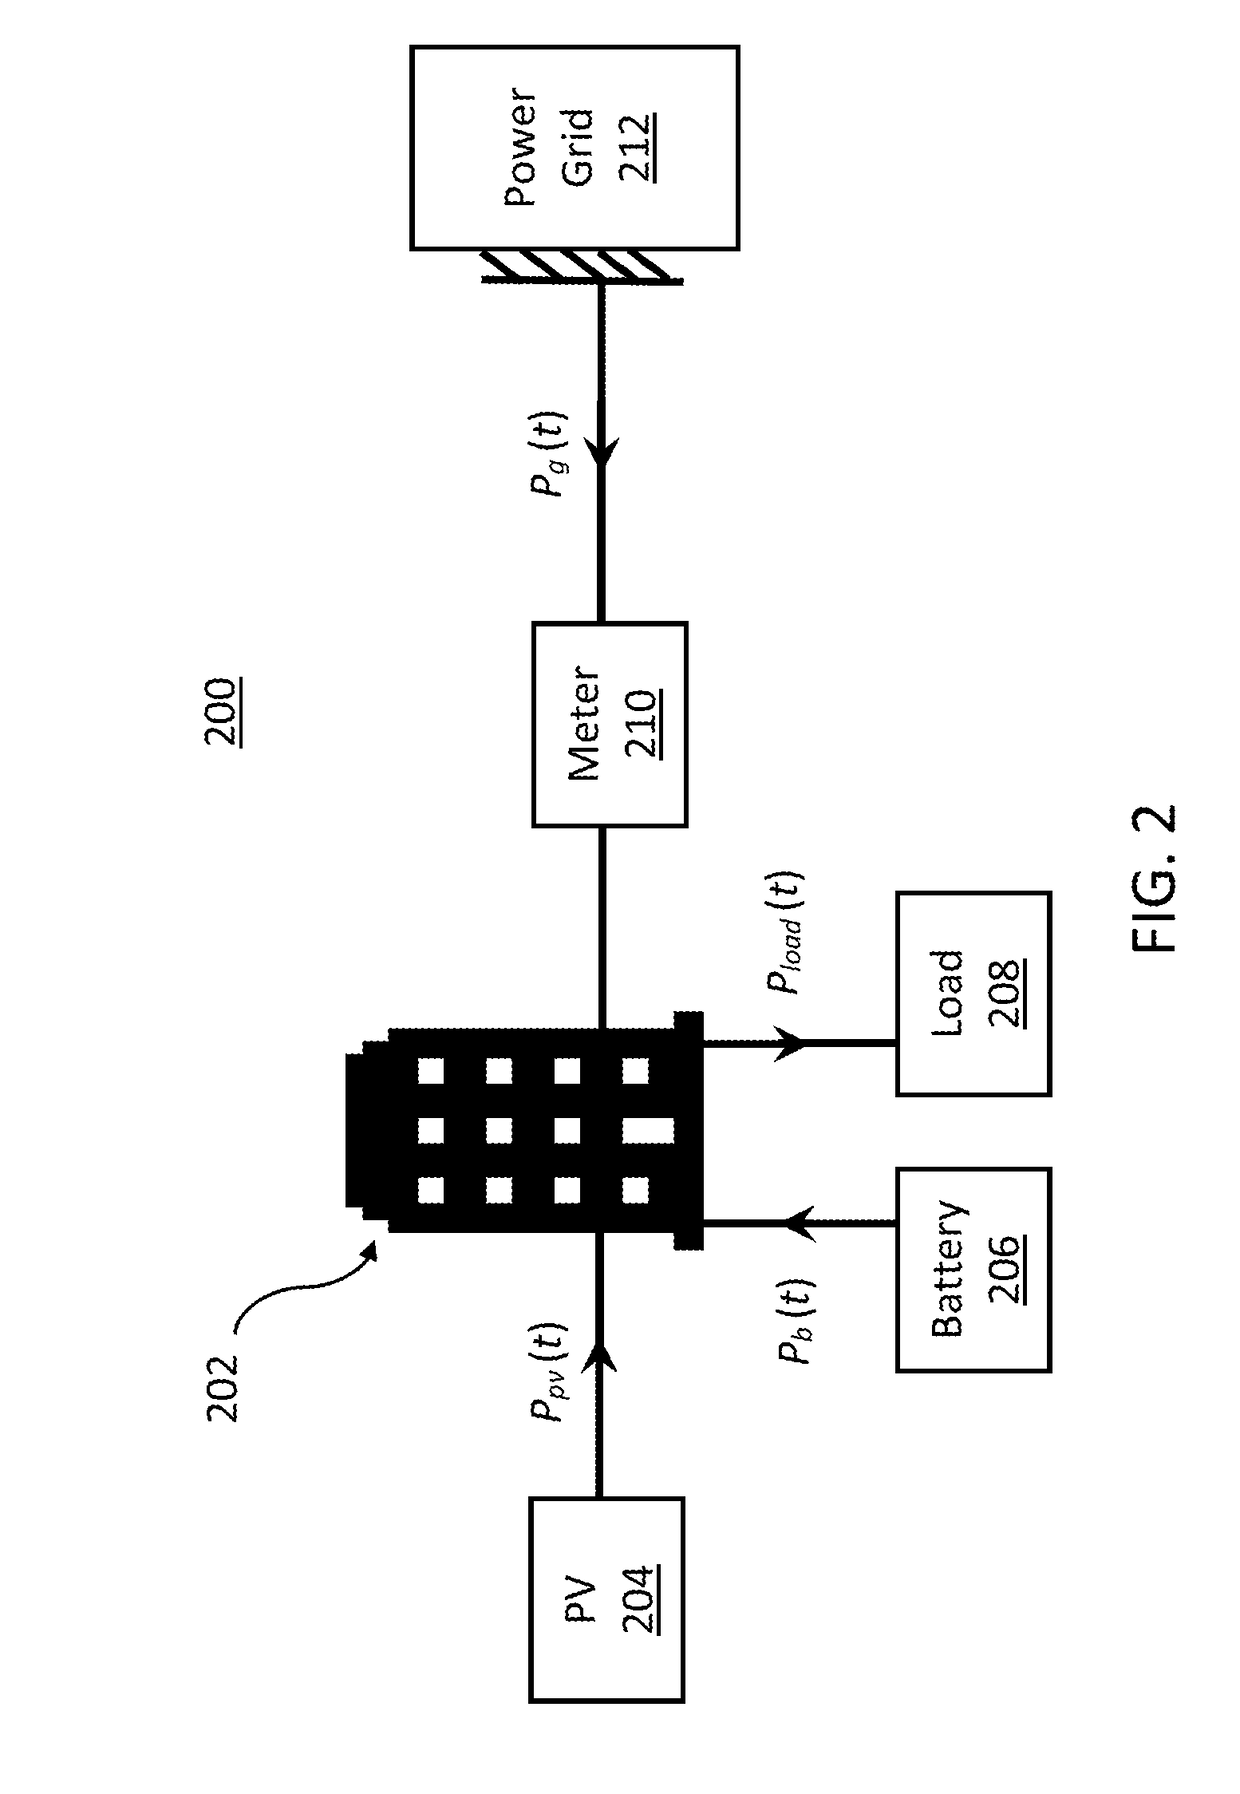 System and method for model predictive energy storage system control